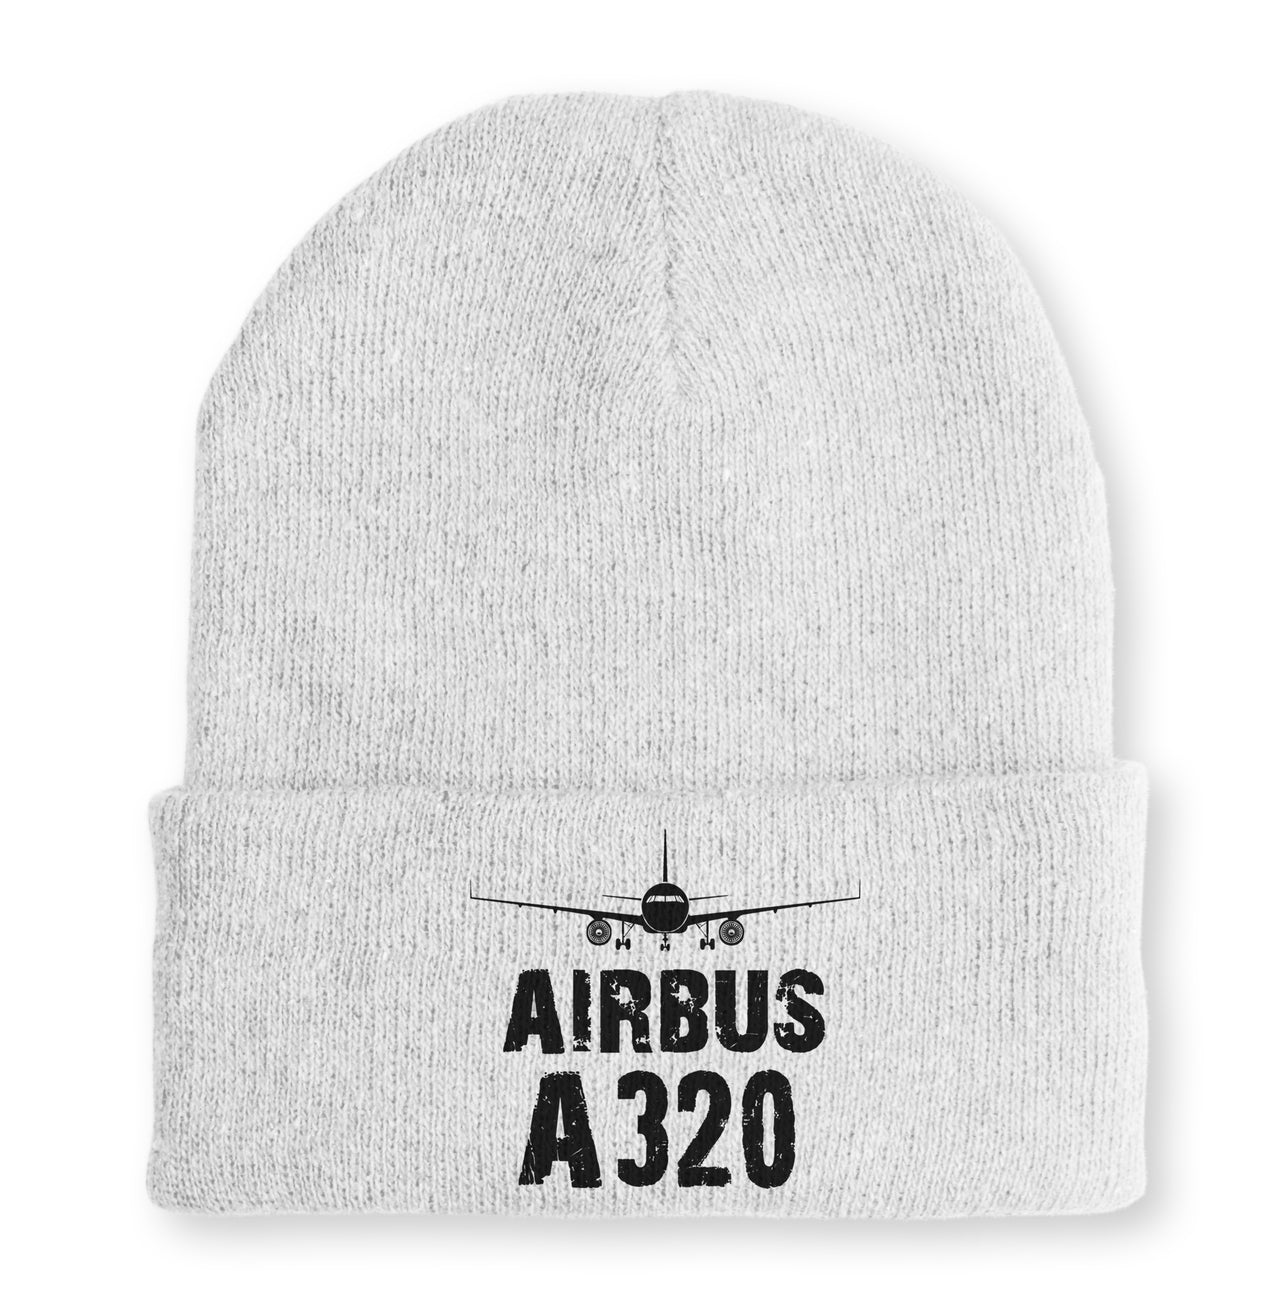 Airbus A320 & Plane Embroidered Beanies